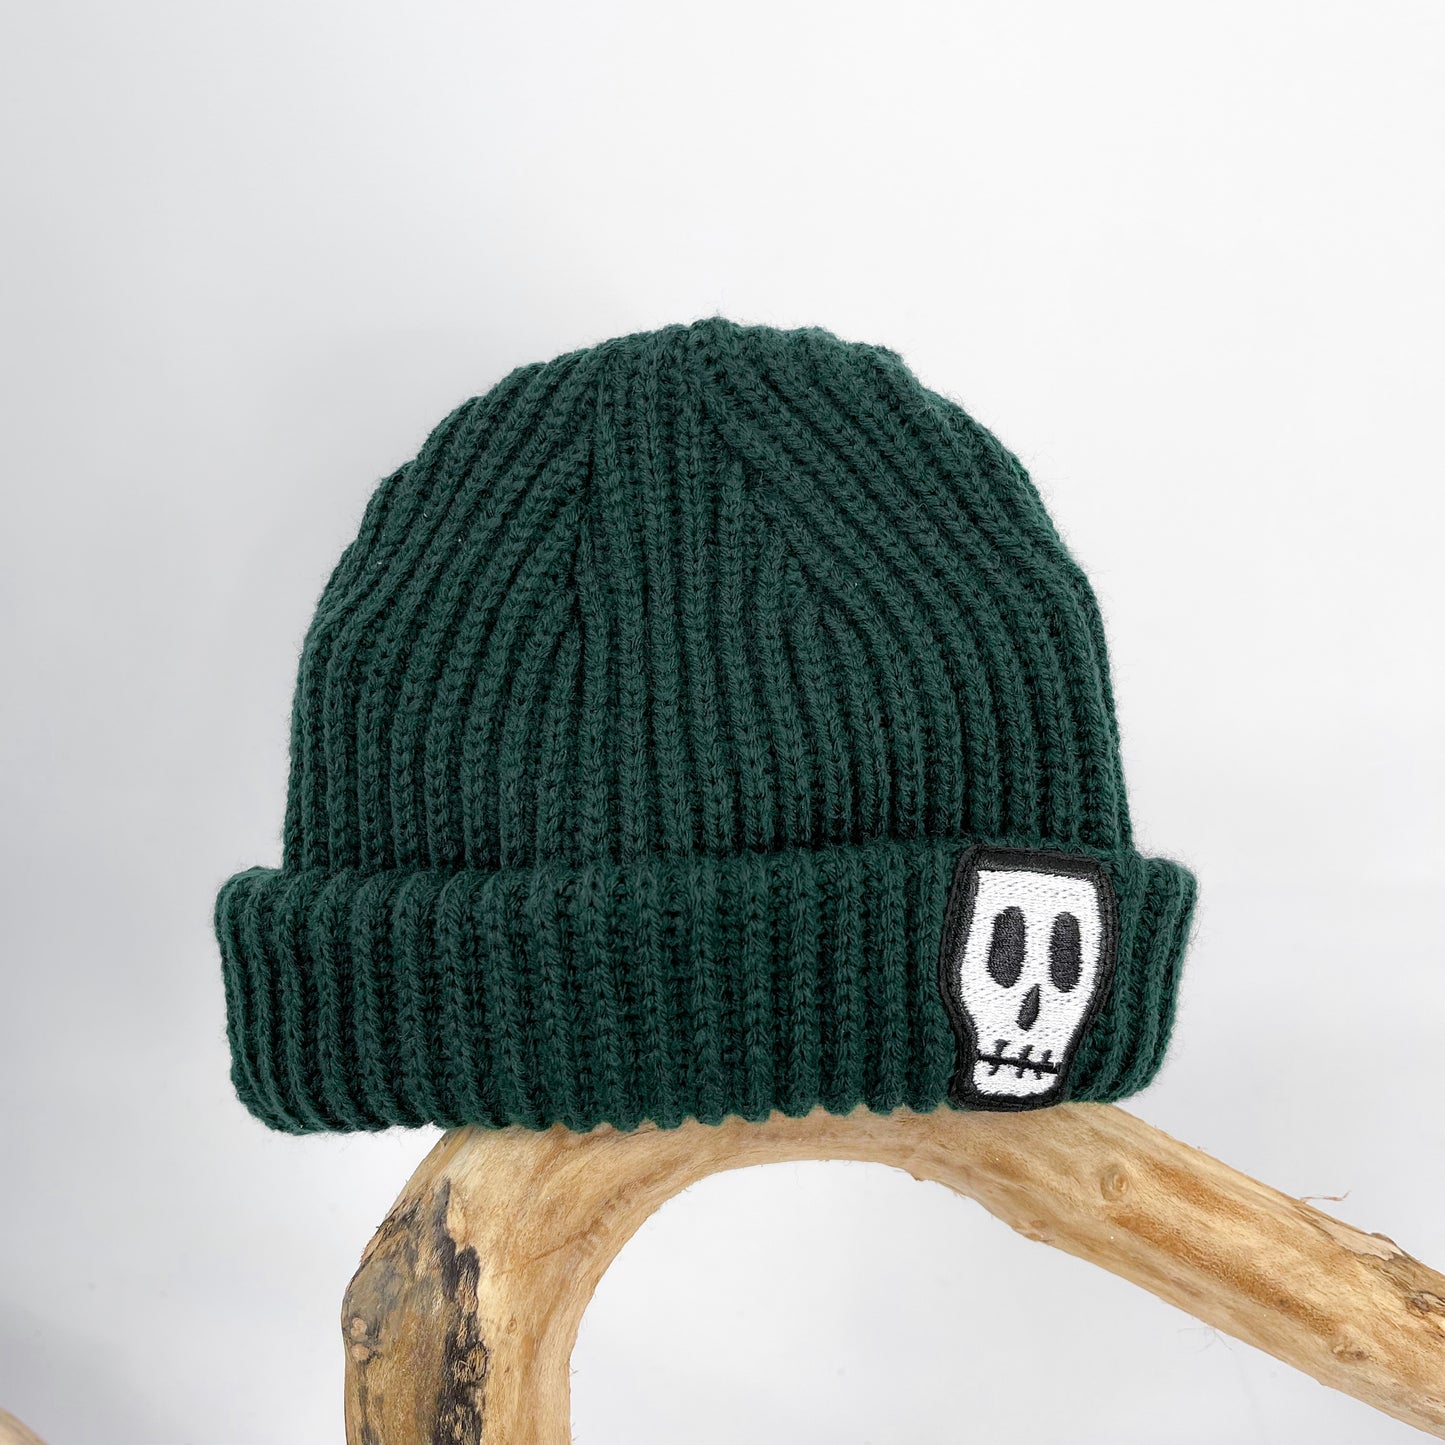 Kids trawler beanie, green with embroidered Skelly Skull logo 